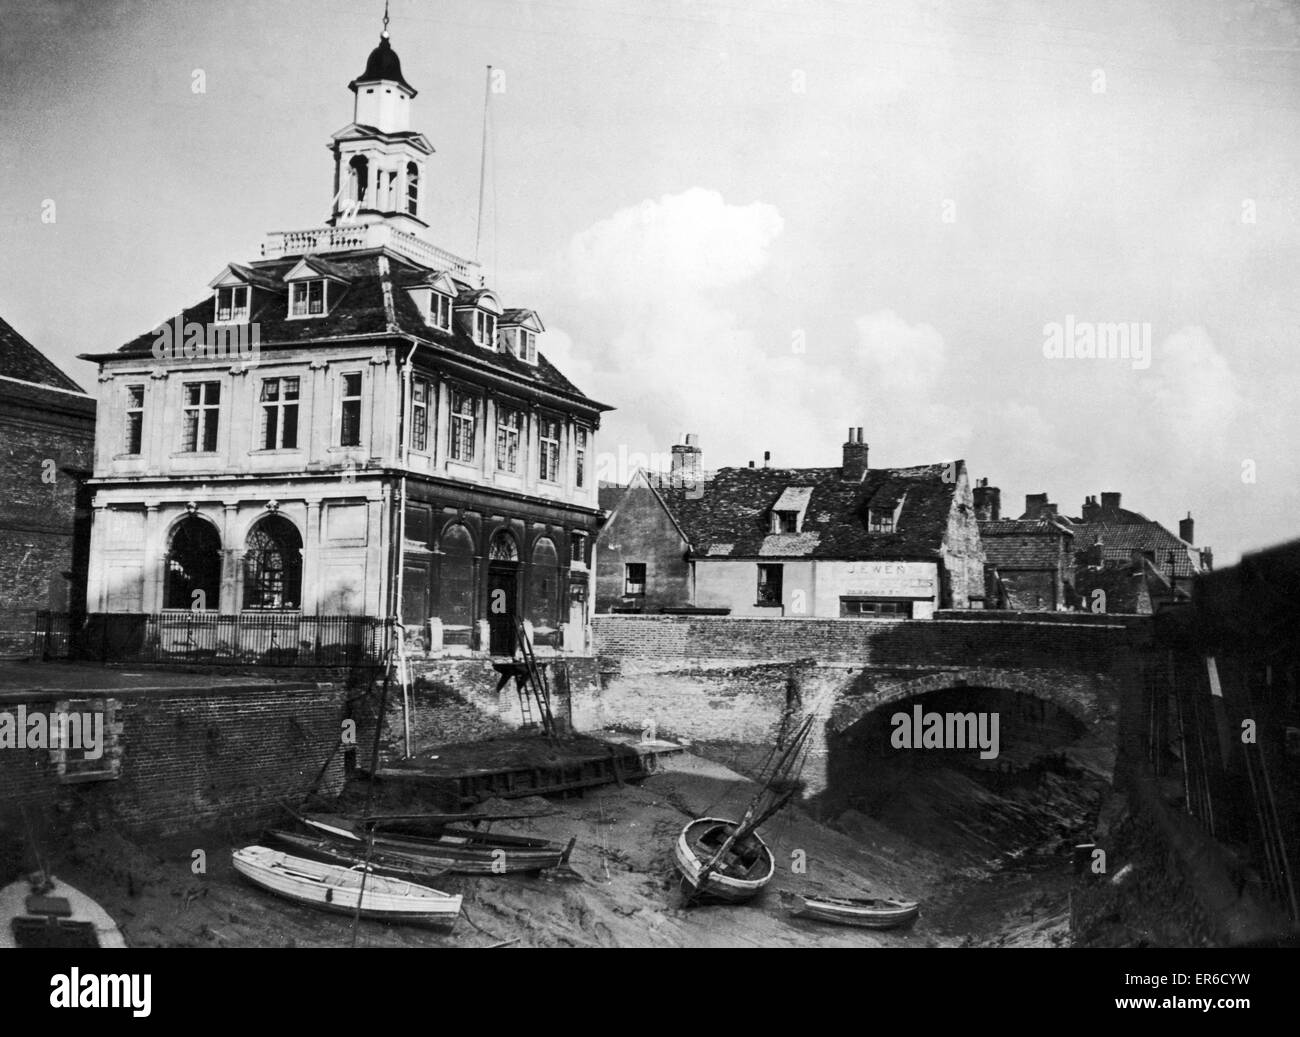 The Custom's House, built in 1683, King¿ Lynn, Norfolk, Circa 1945. The River Cuse runs alongside but is a mere trickle at low tide. Stock Photo